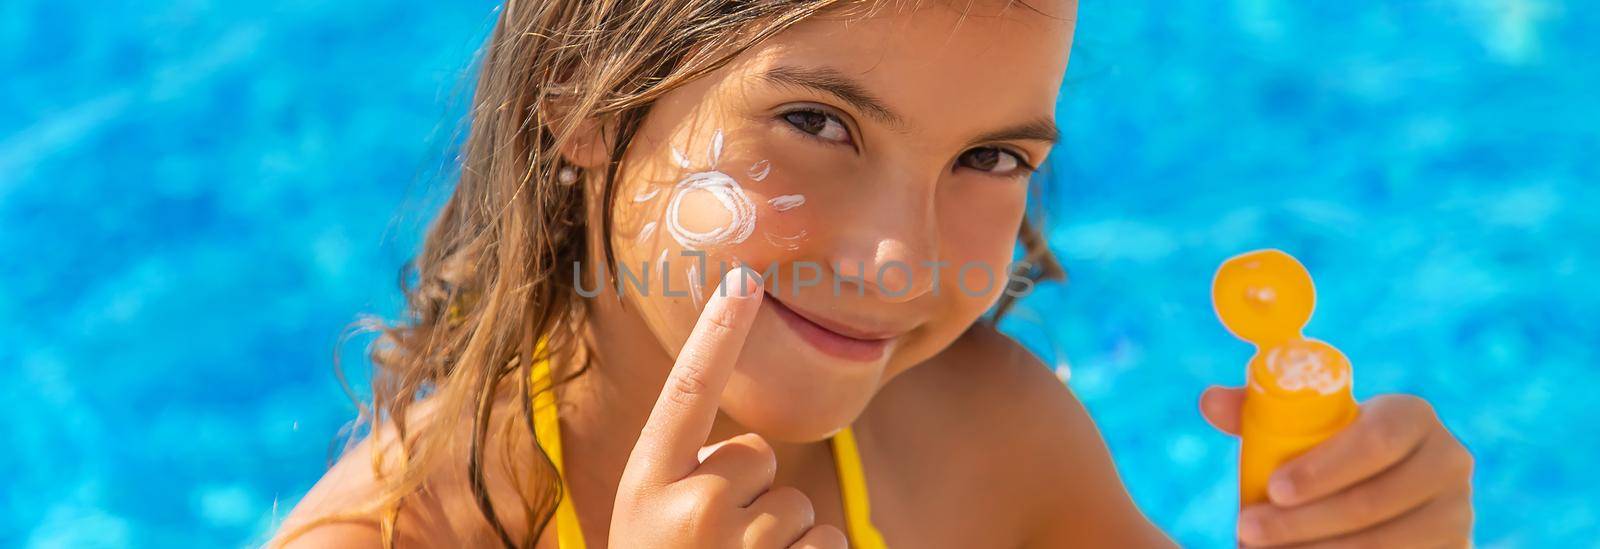 The child is putting sunscreen on her face. Selective focus. by yanadjana